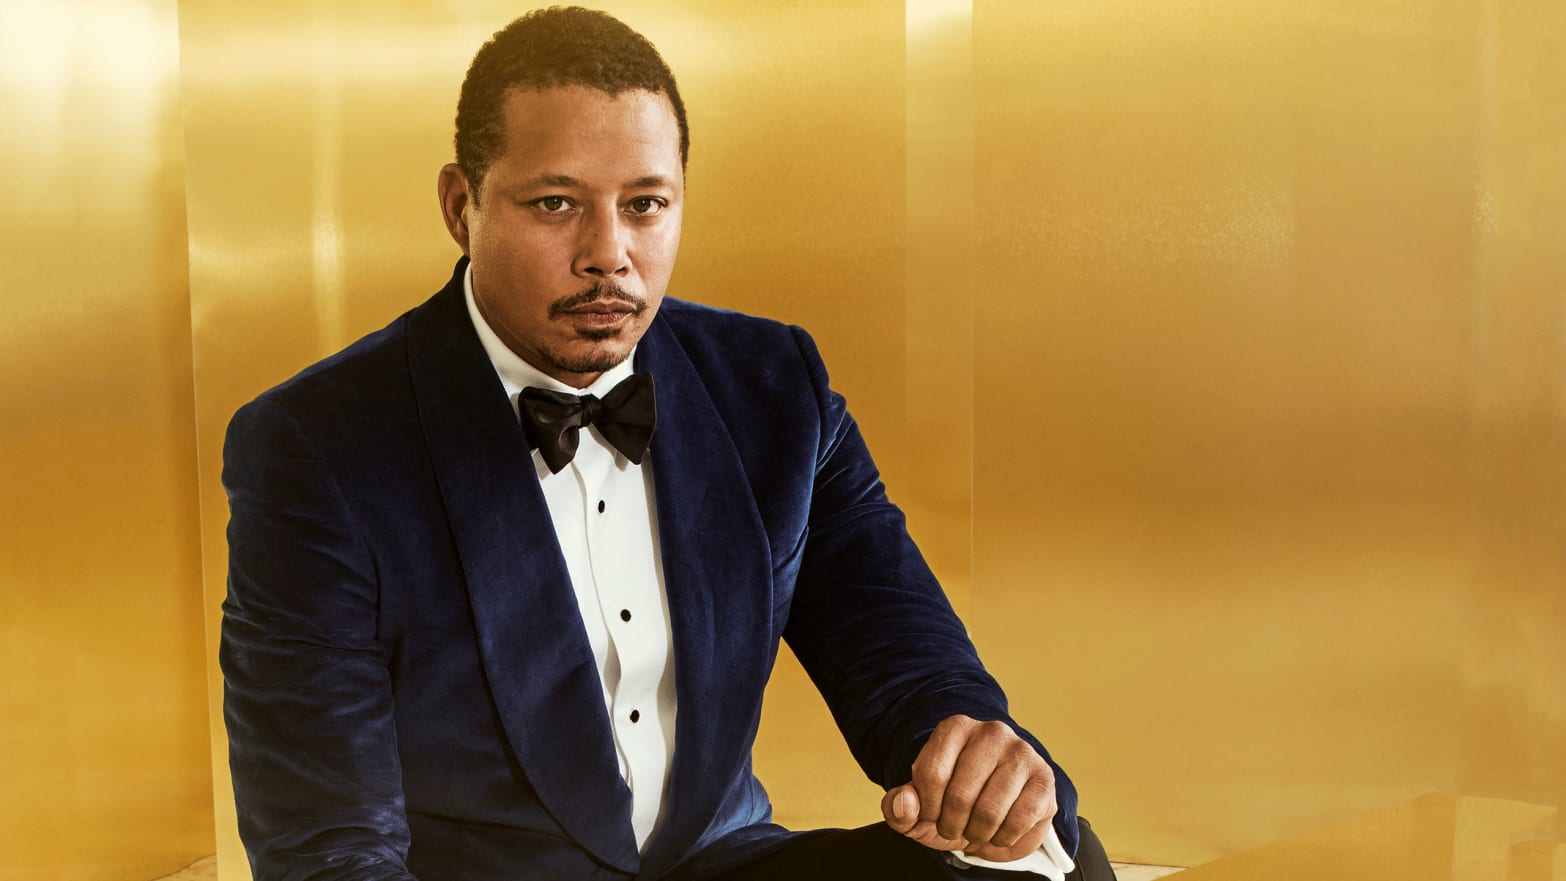 Why Terrence Howard, Alleged Abuser of Women, Is Ruining 'Empire'